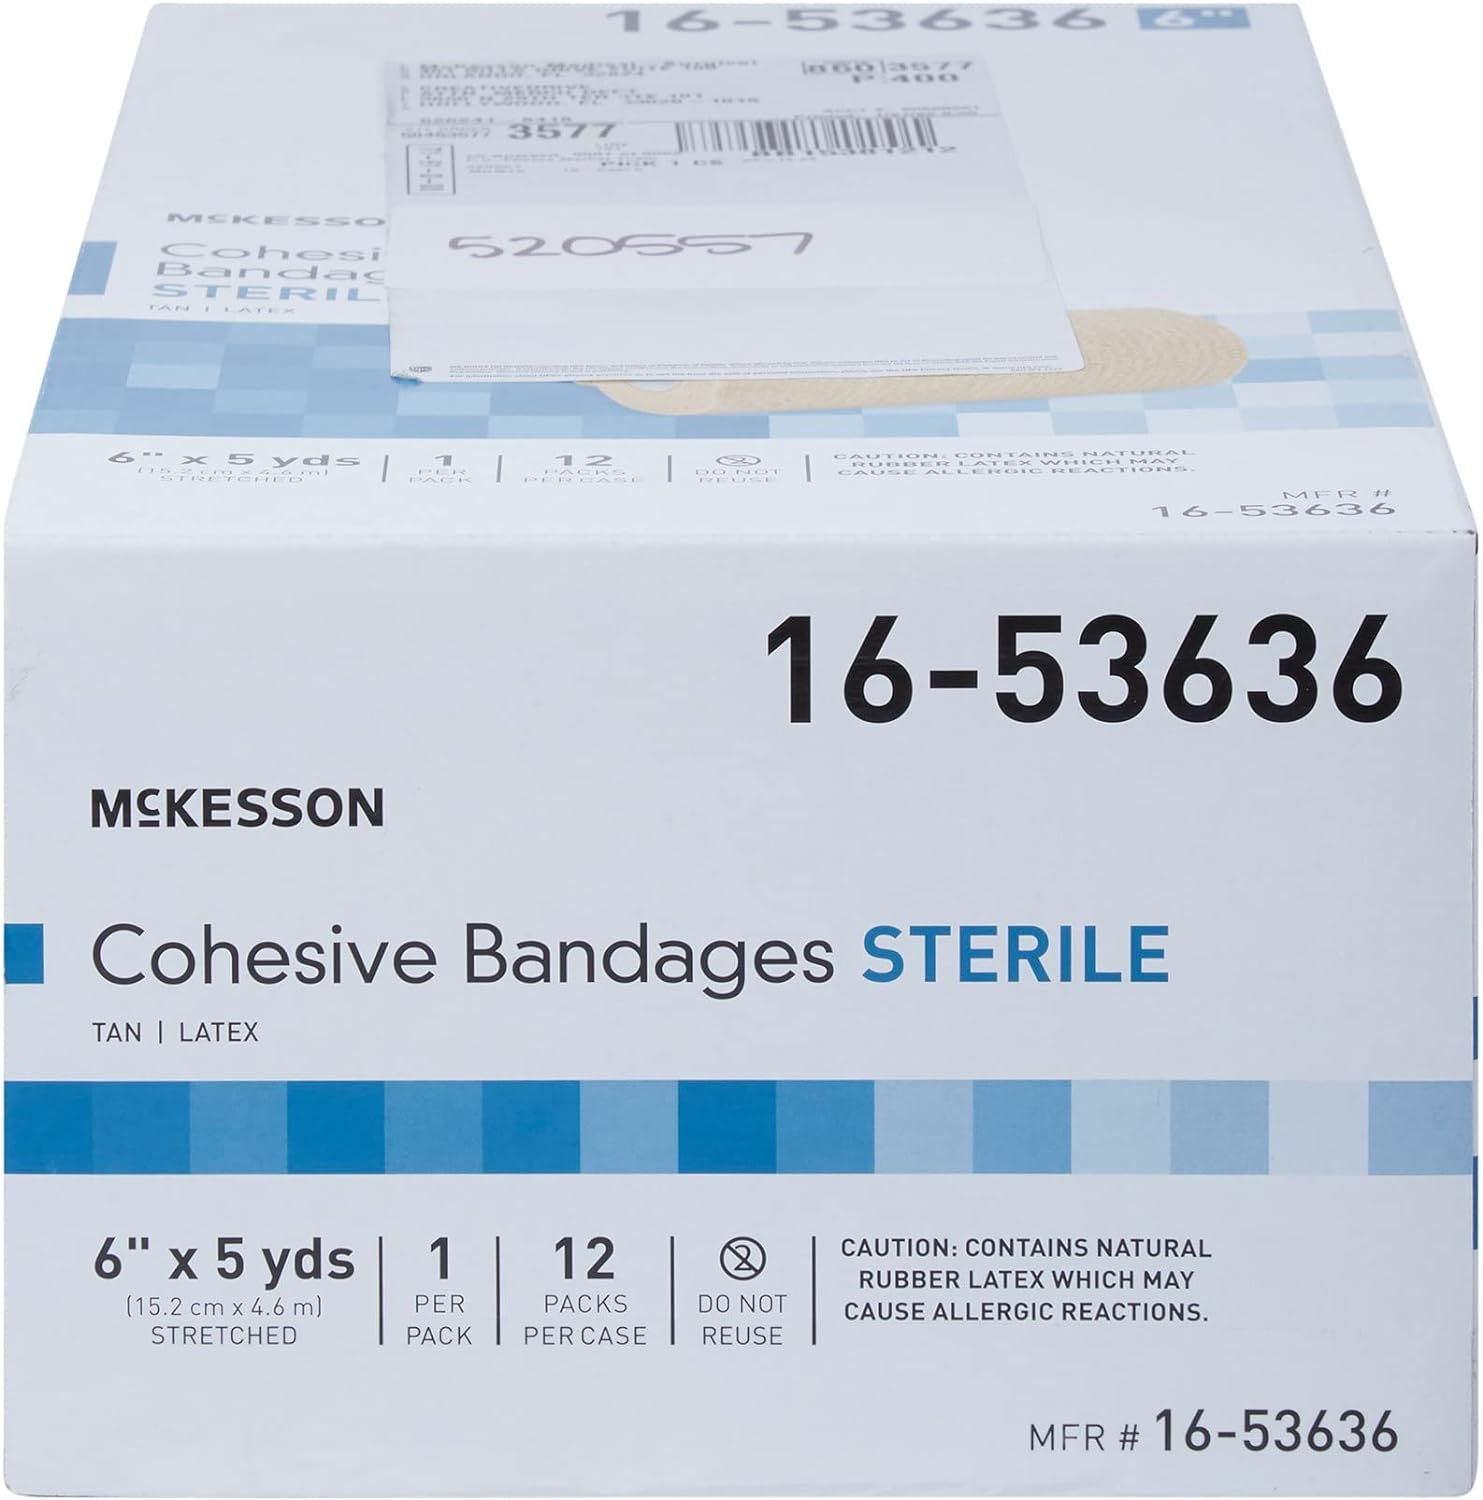 McKesson Cohesive Bandage, Sterile, Self-Adherent Closure, Tan, 6 in x 5 yds, 1 Count, 1 Roll